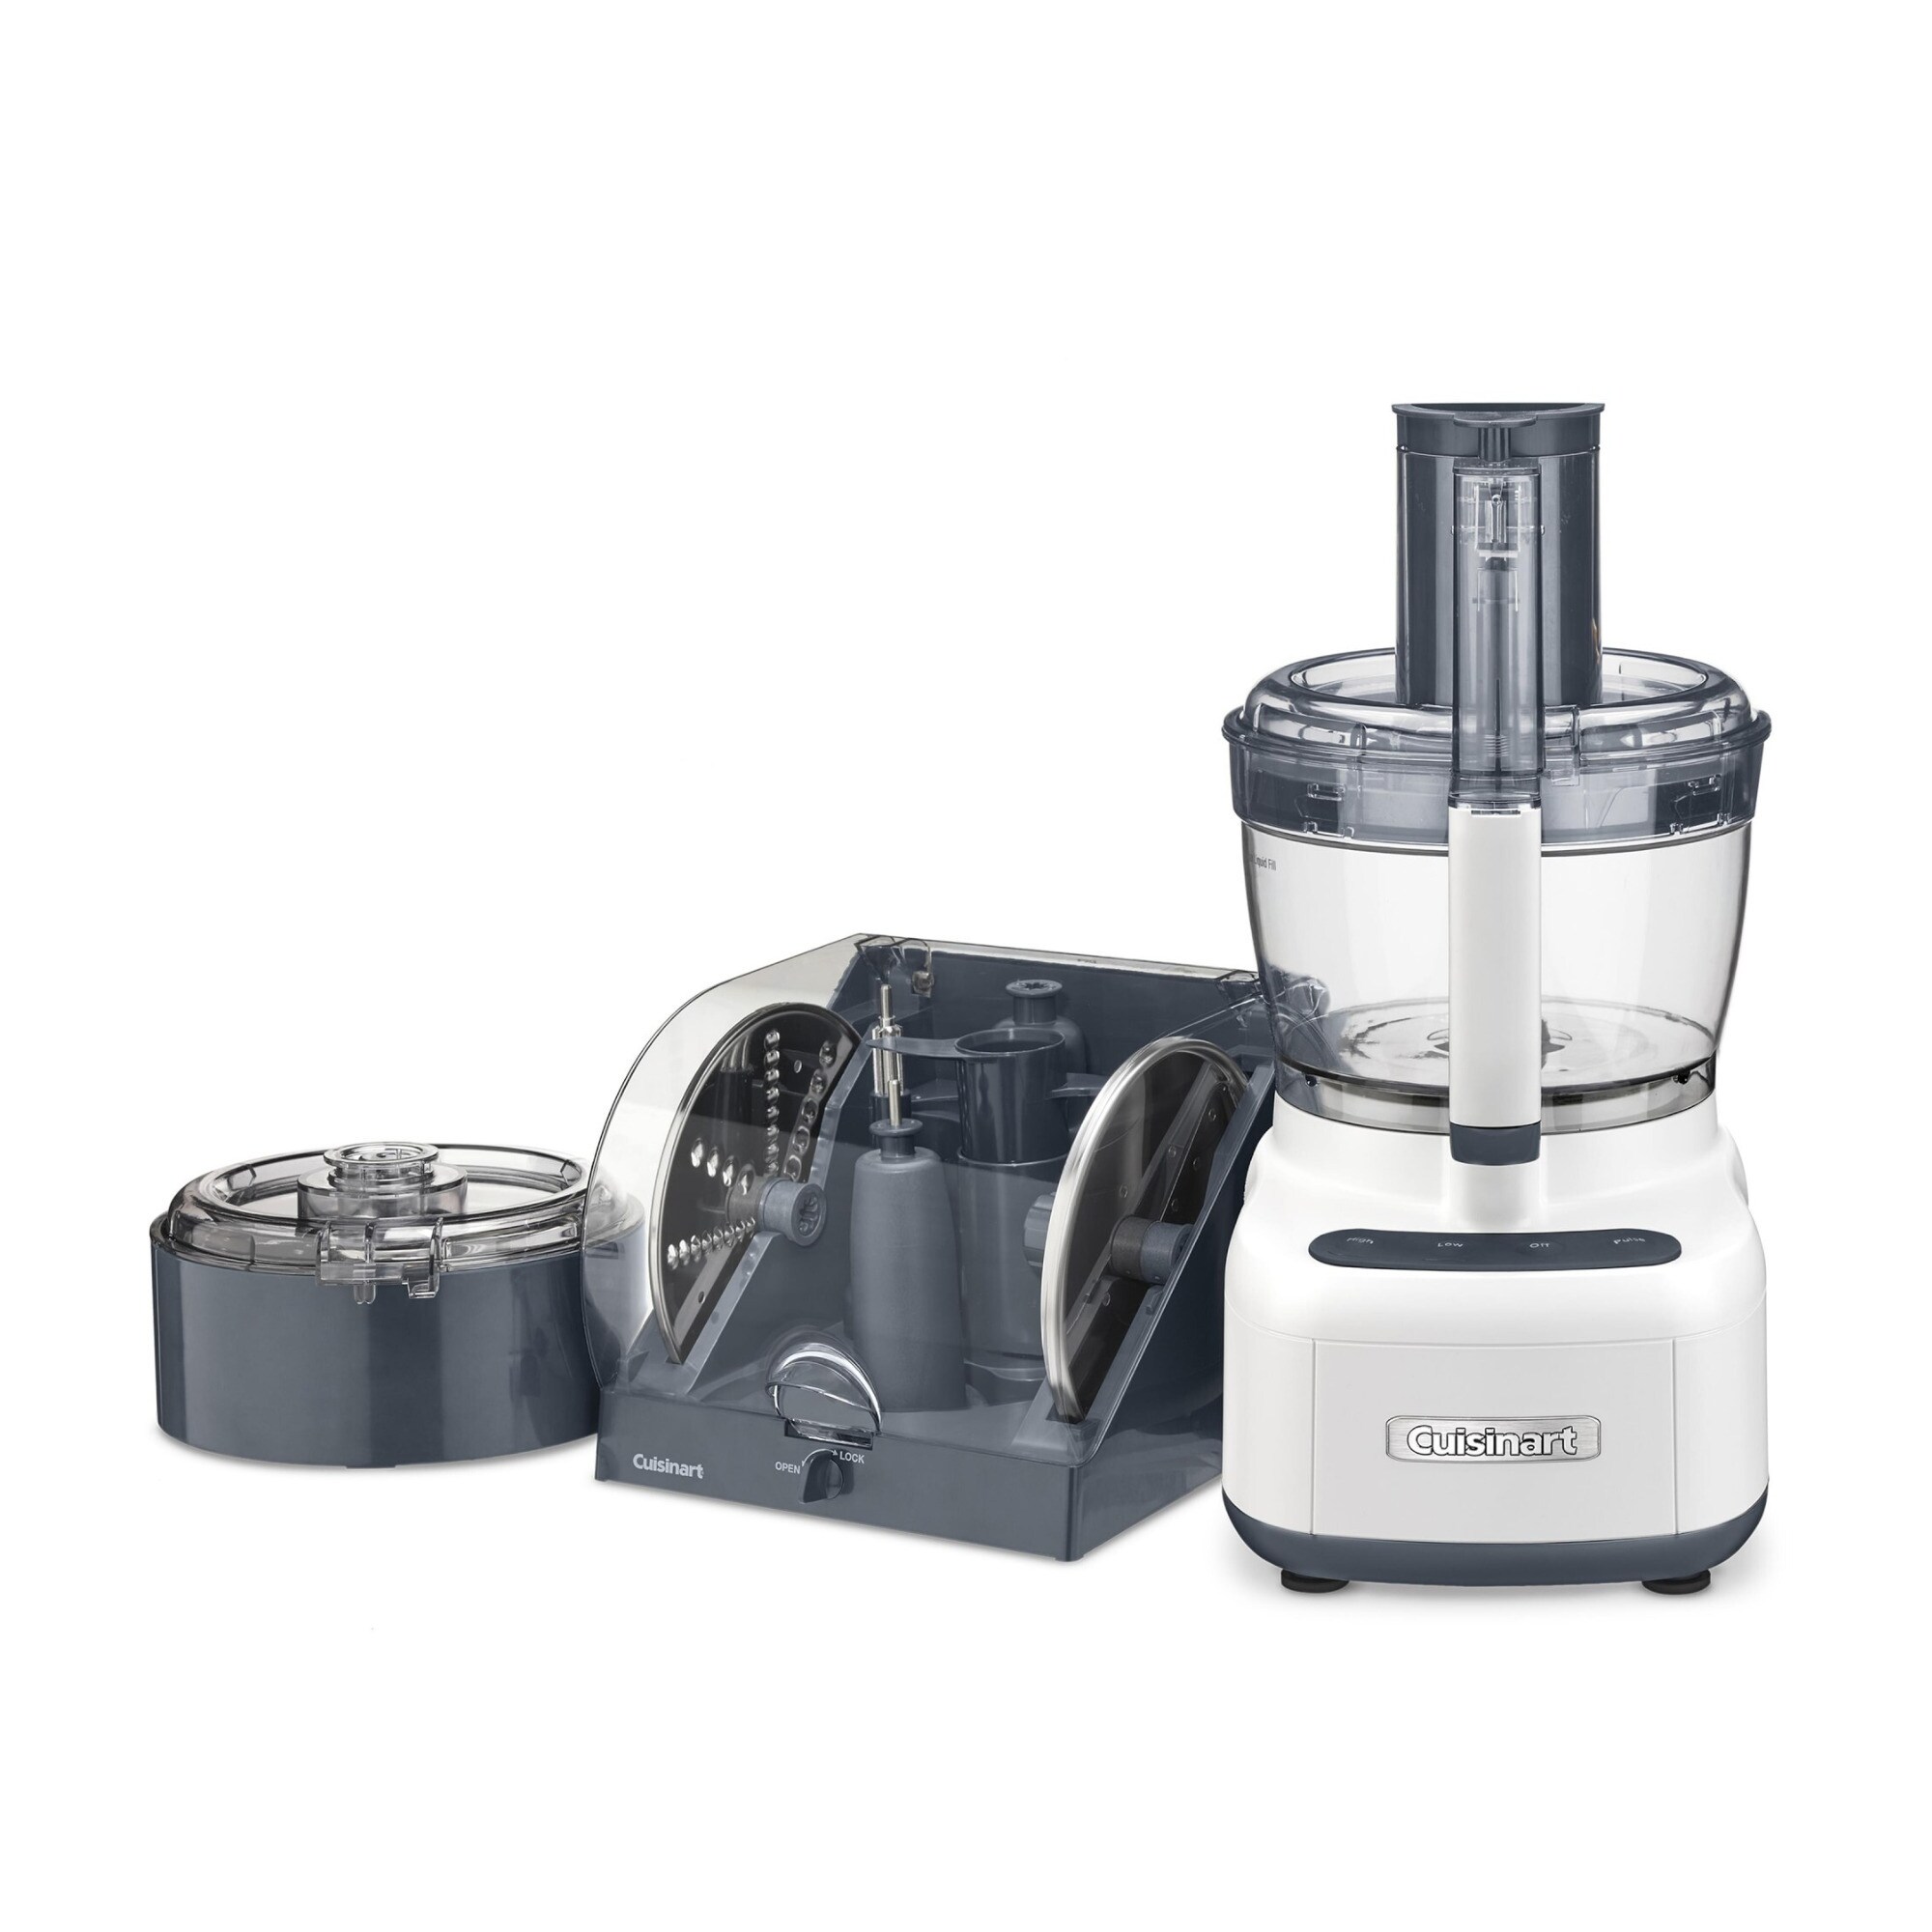 https://ak1.ostkcdn.com/images/products/is/images/direct/05f49622bfd2b46739658f08ef2d5f8ebbc744ae/Cuisinart-Elemental-13-Cup-Food-Processor-w--Spiralizer-%26Dicer-%28White%29.jpg